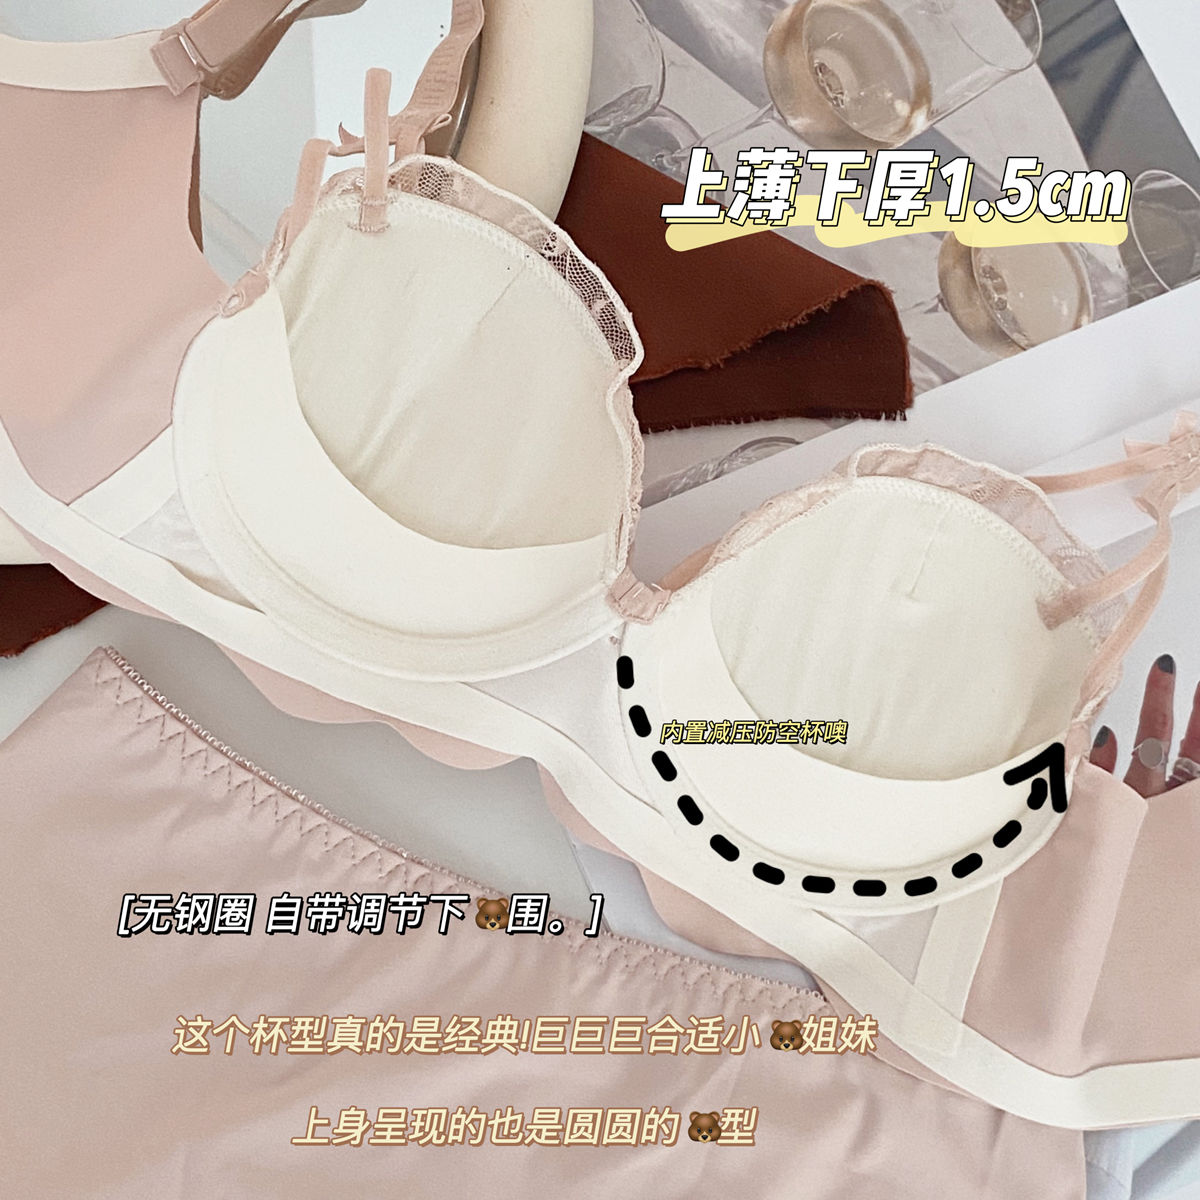 Japanese small chest gathered no steel ring underwear women's anti-sagging pure desire style  new hot style sexy suit